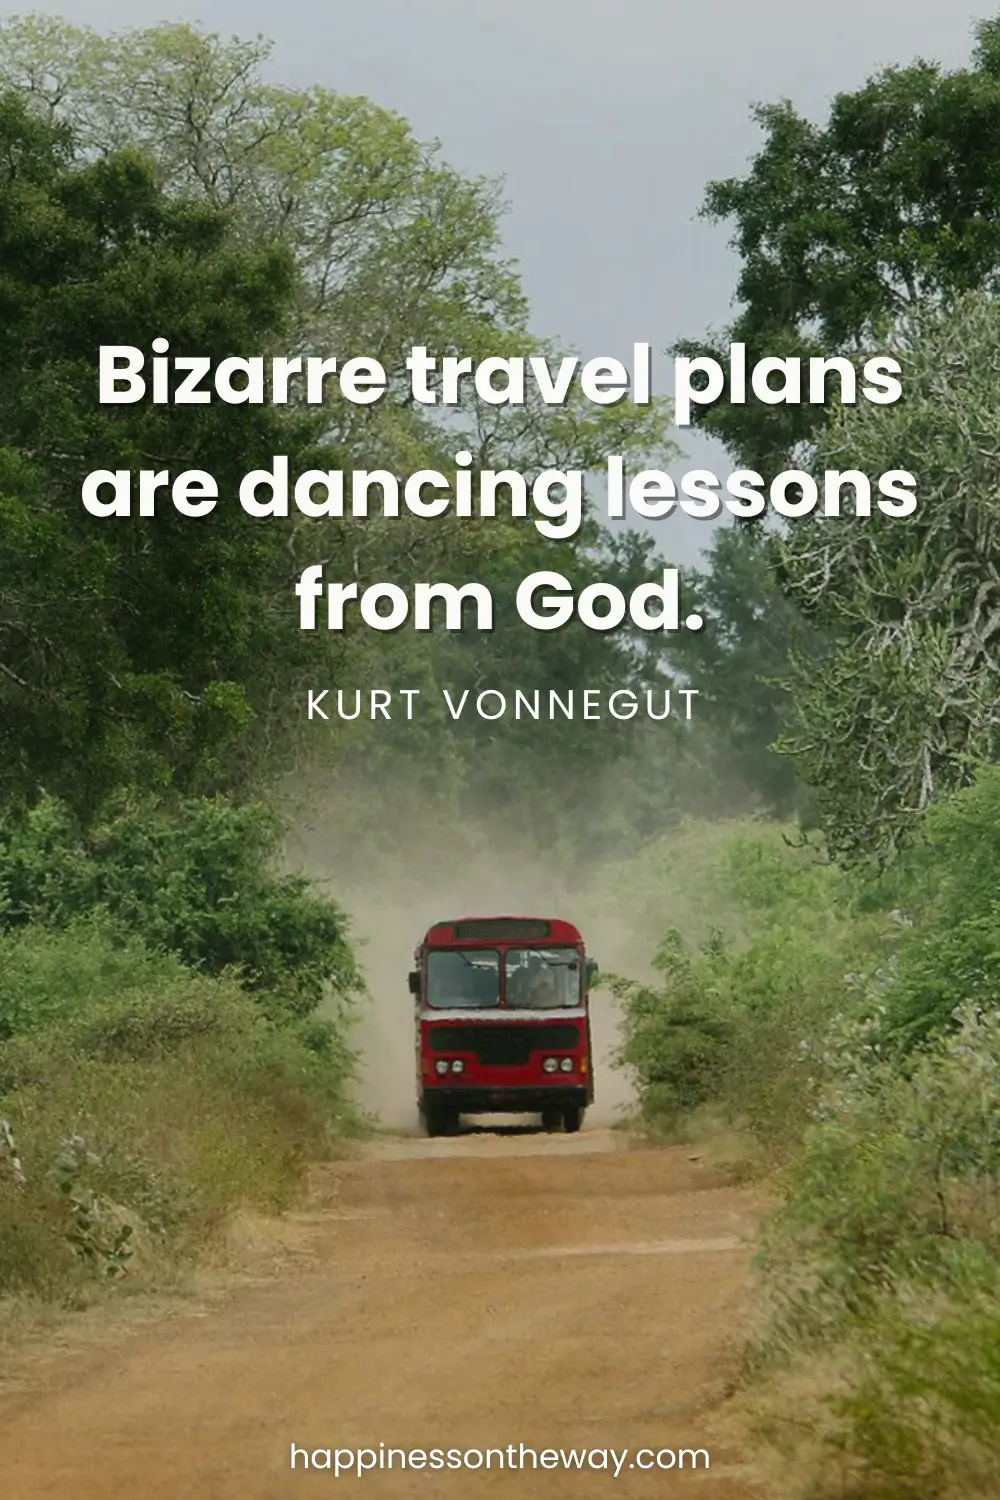 A red bus in Sri Lanka kicks up dust on a rural road through dense greenery, accompanied by the quote 'Bizarre travel plans are dancing lessons from God. – Kurt Vonnegut